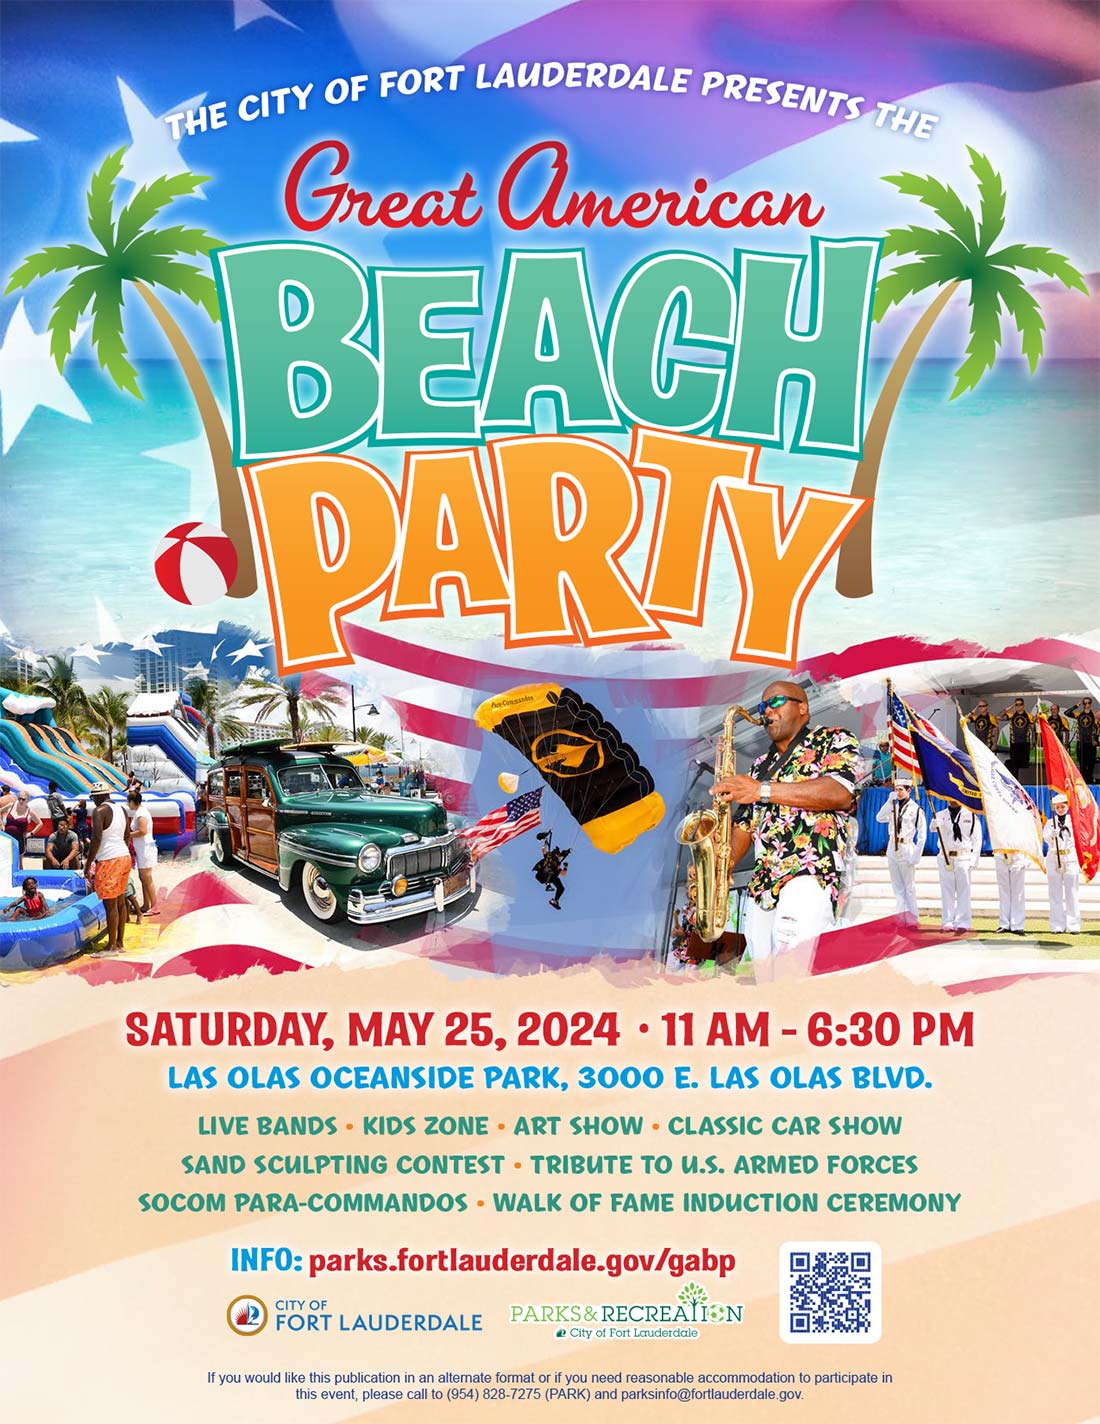 The Great American Beach Party - Saturday, May 25, 2023